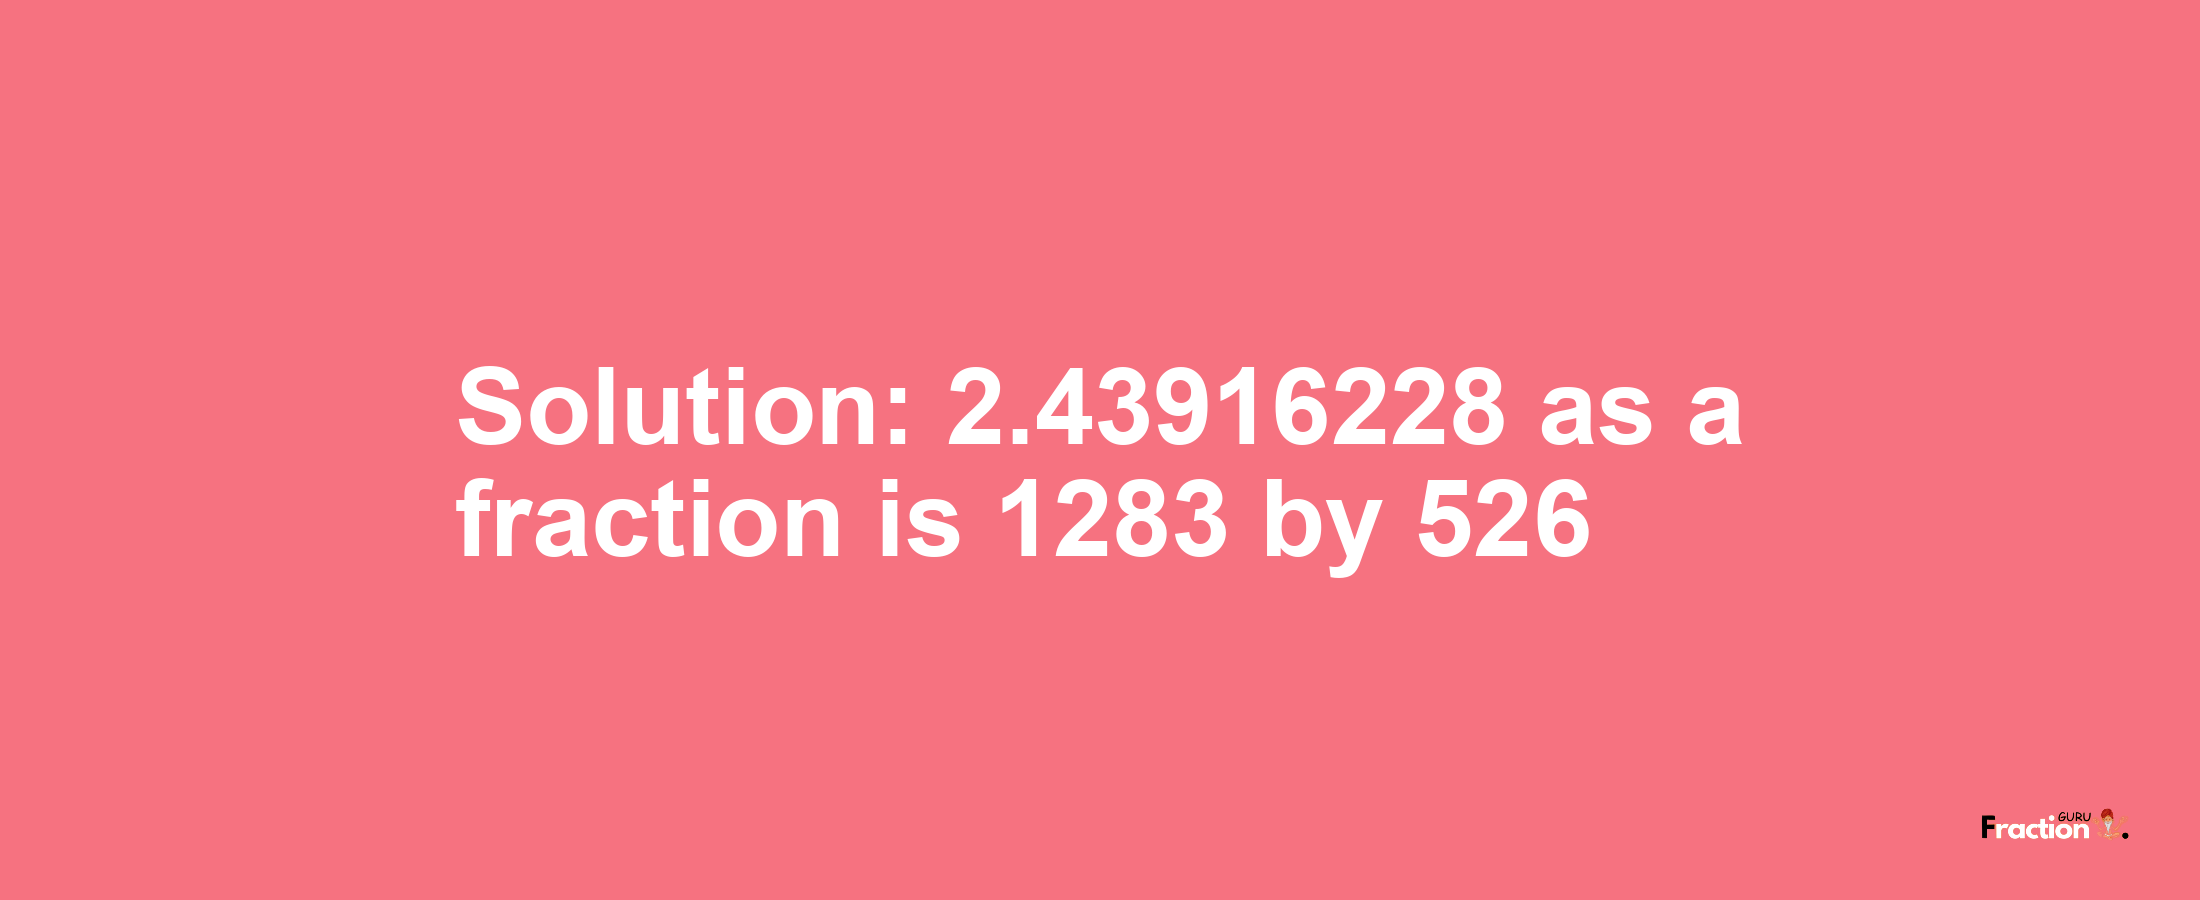 Solution:2.43916228 as a fraction is 1283/526